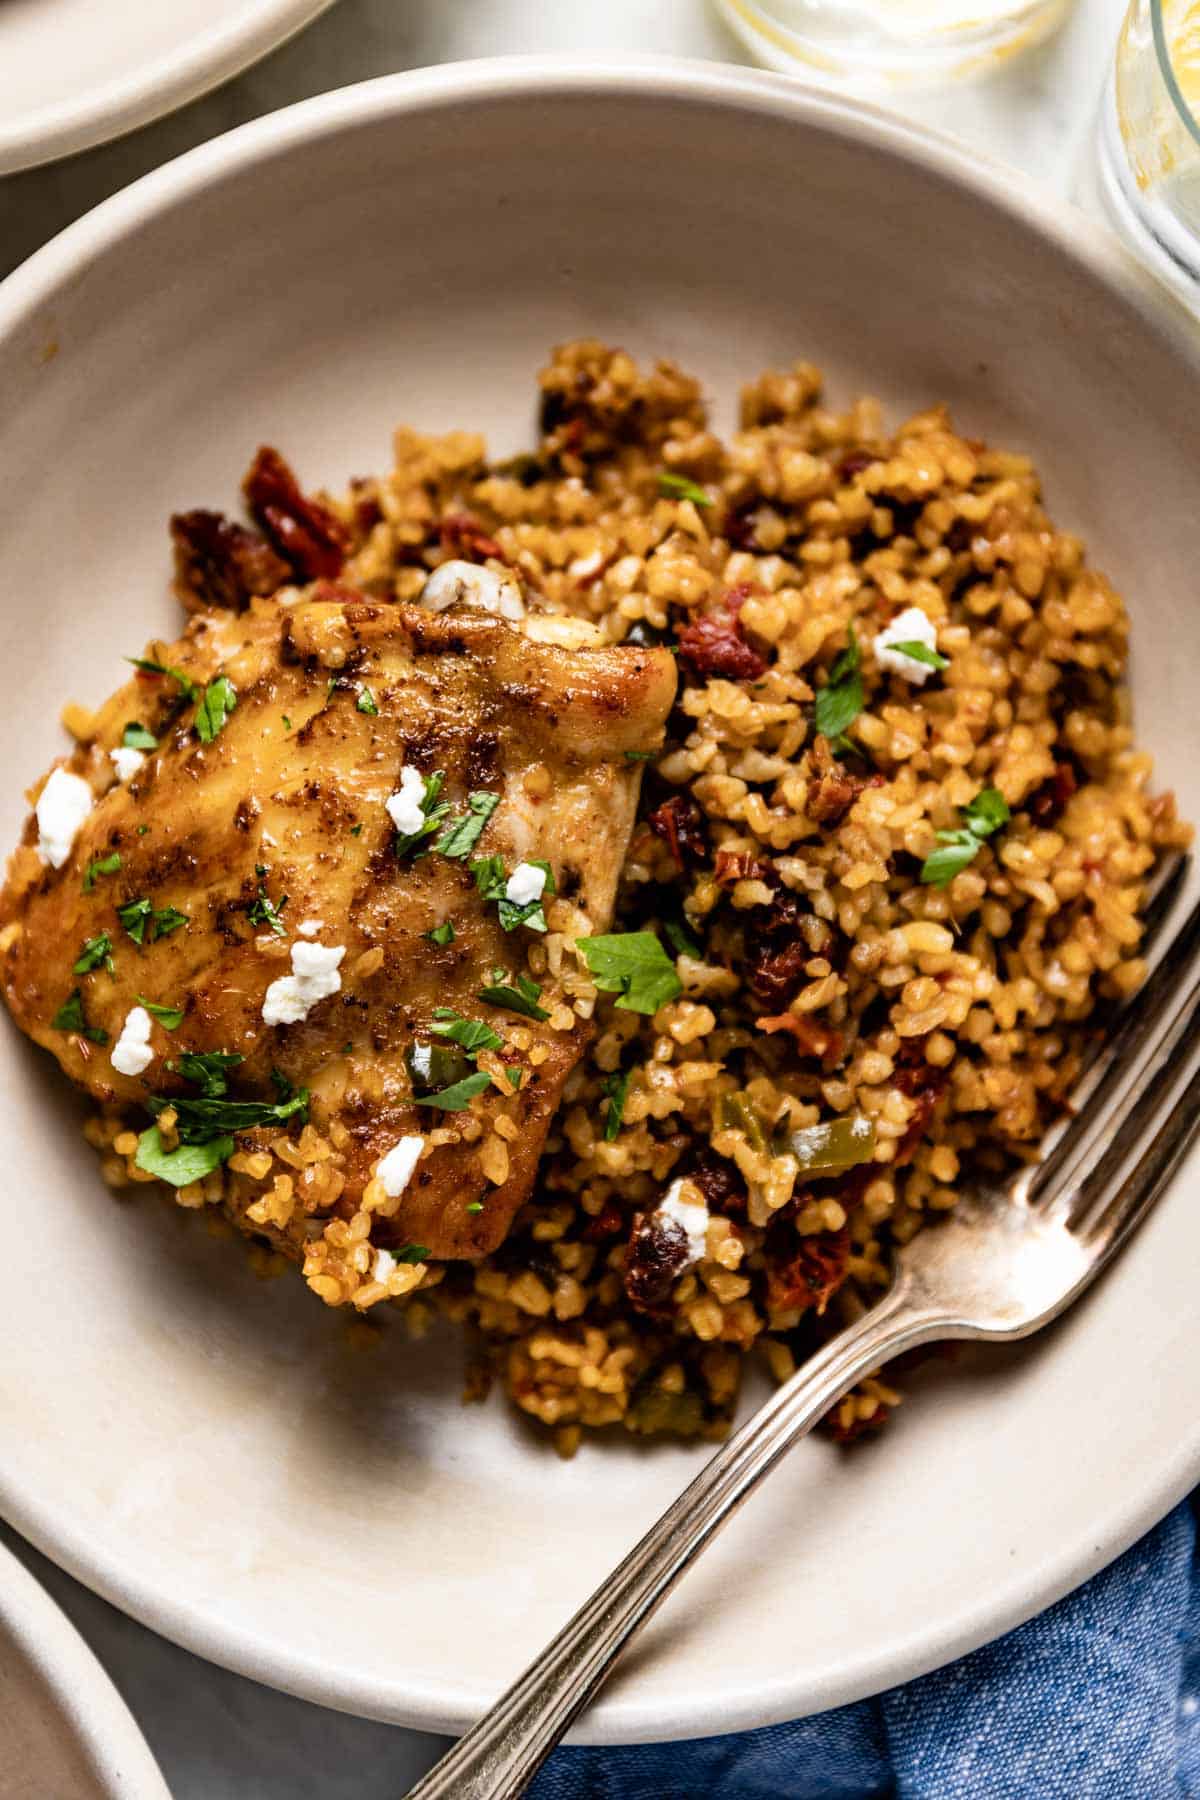 A roasted chicken thigh with bulgur wheat on a plate with a fork from the top view.